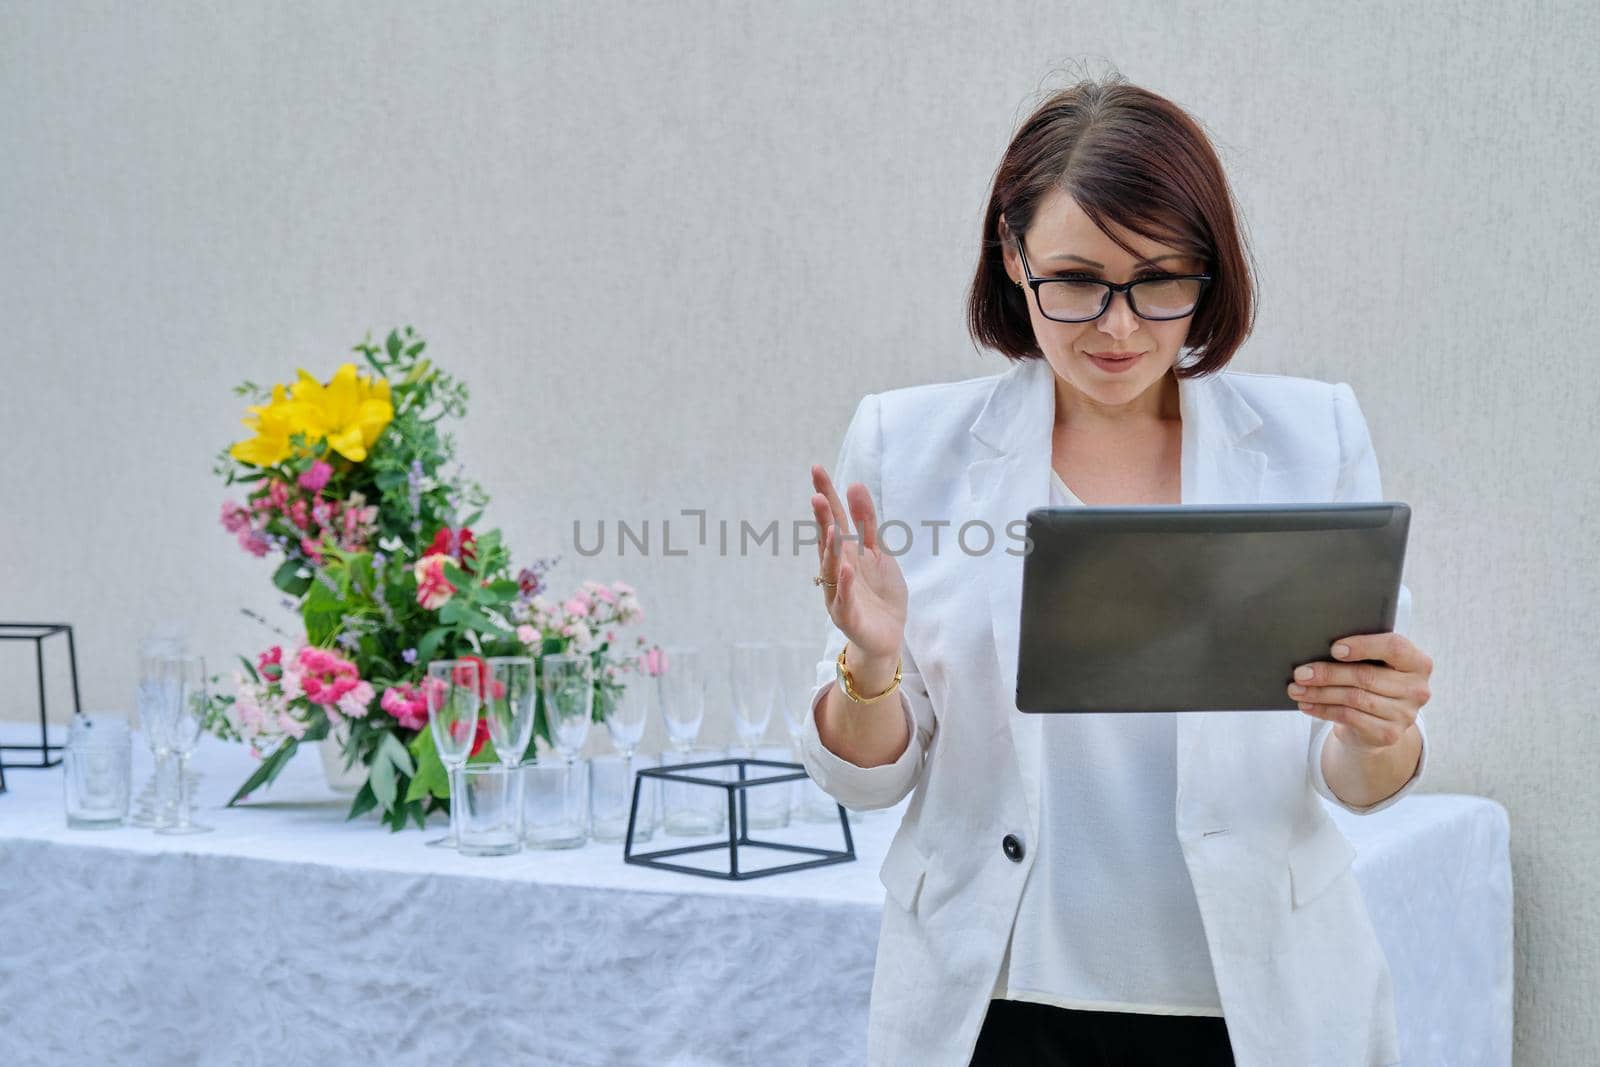 Organization of parties, ceremonies, professional woman organizer with digital tablet by VH-studio